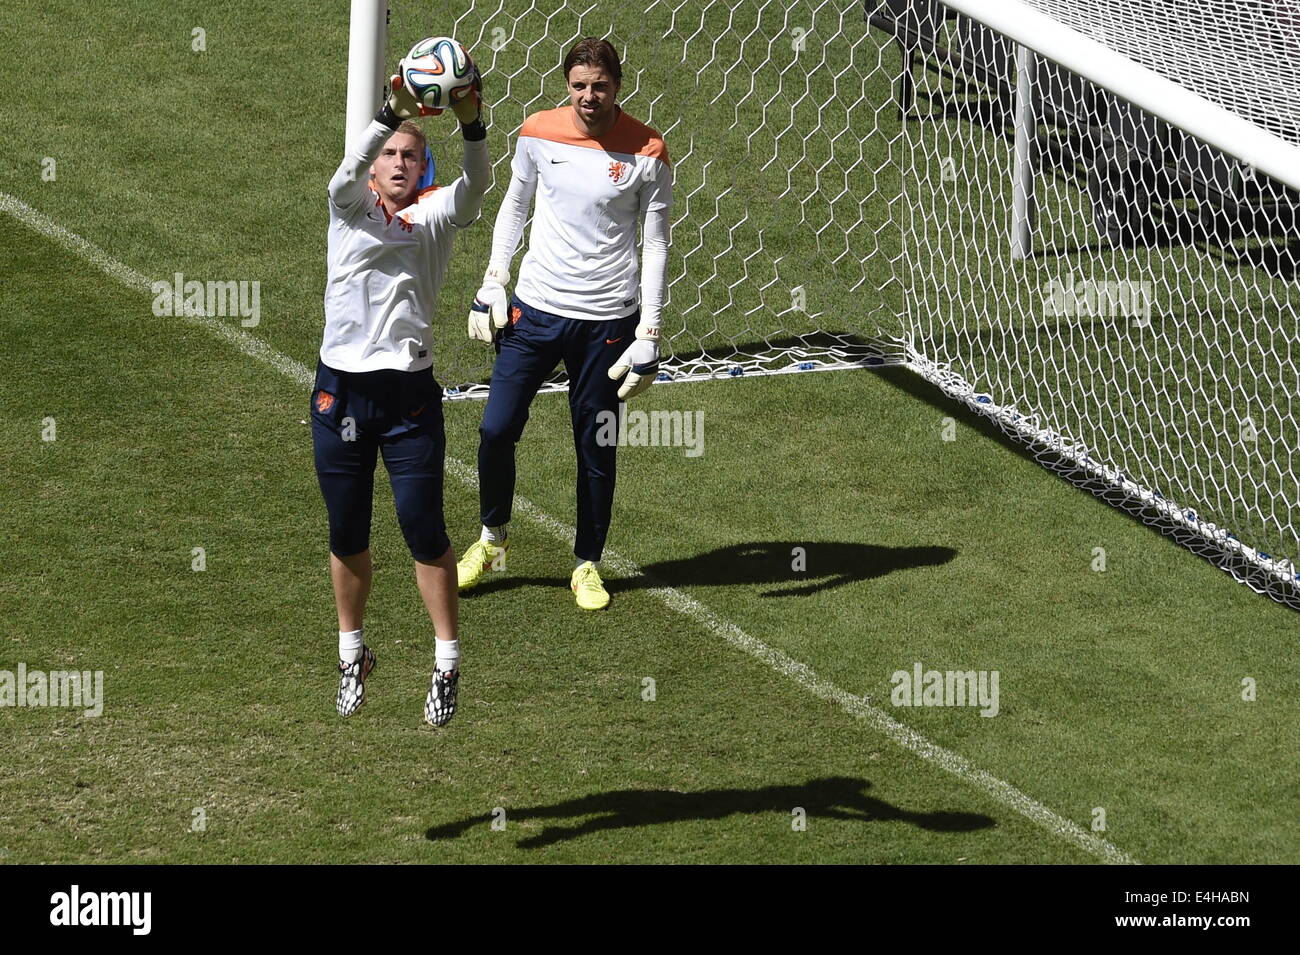 Brasilia, Brazil. 5th July, 2014. Netherlands' goalkeepers Jasper Cillessen(L) and Tim Krul attend a training session at the Estadio Nacional Stadium in Brasilia, Brazil, on July 5, 2014. Netherlands will play the 2014 FIFA World Cup football match for third place against host Brazil on Saturday. © Lui Siu Wai/Xinhua/Alamy Live News Stock Photo